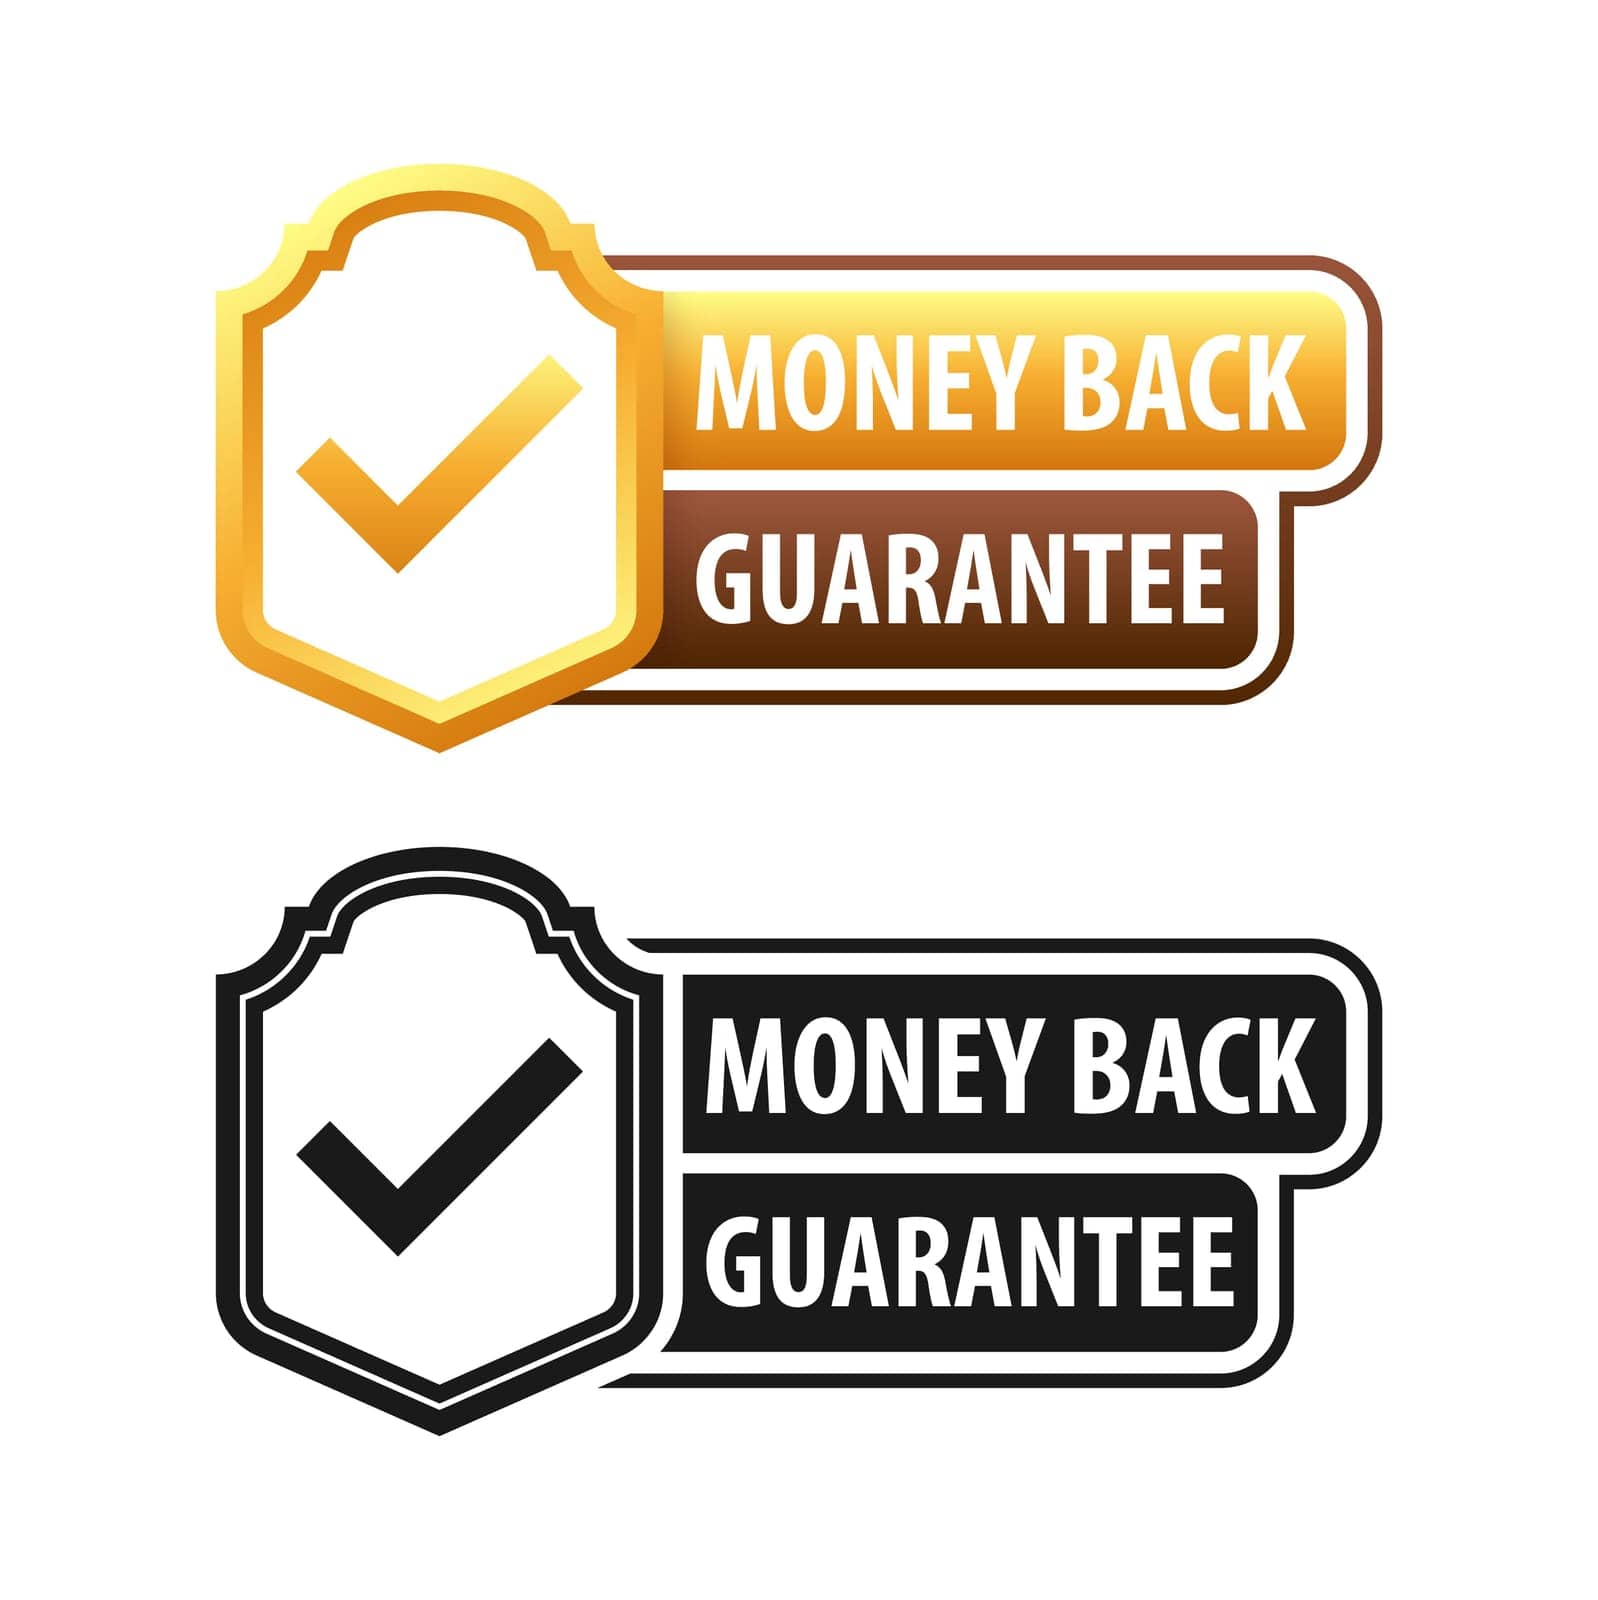 Money back guarantee label. Confidence in quality and reliability backed by money back. Vector illustration